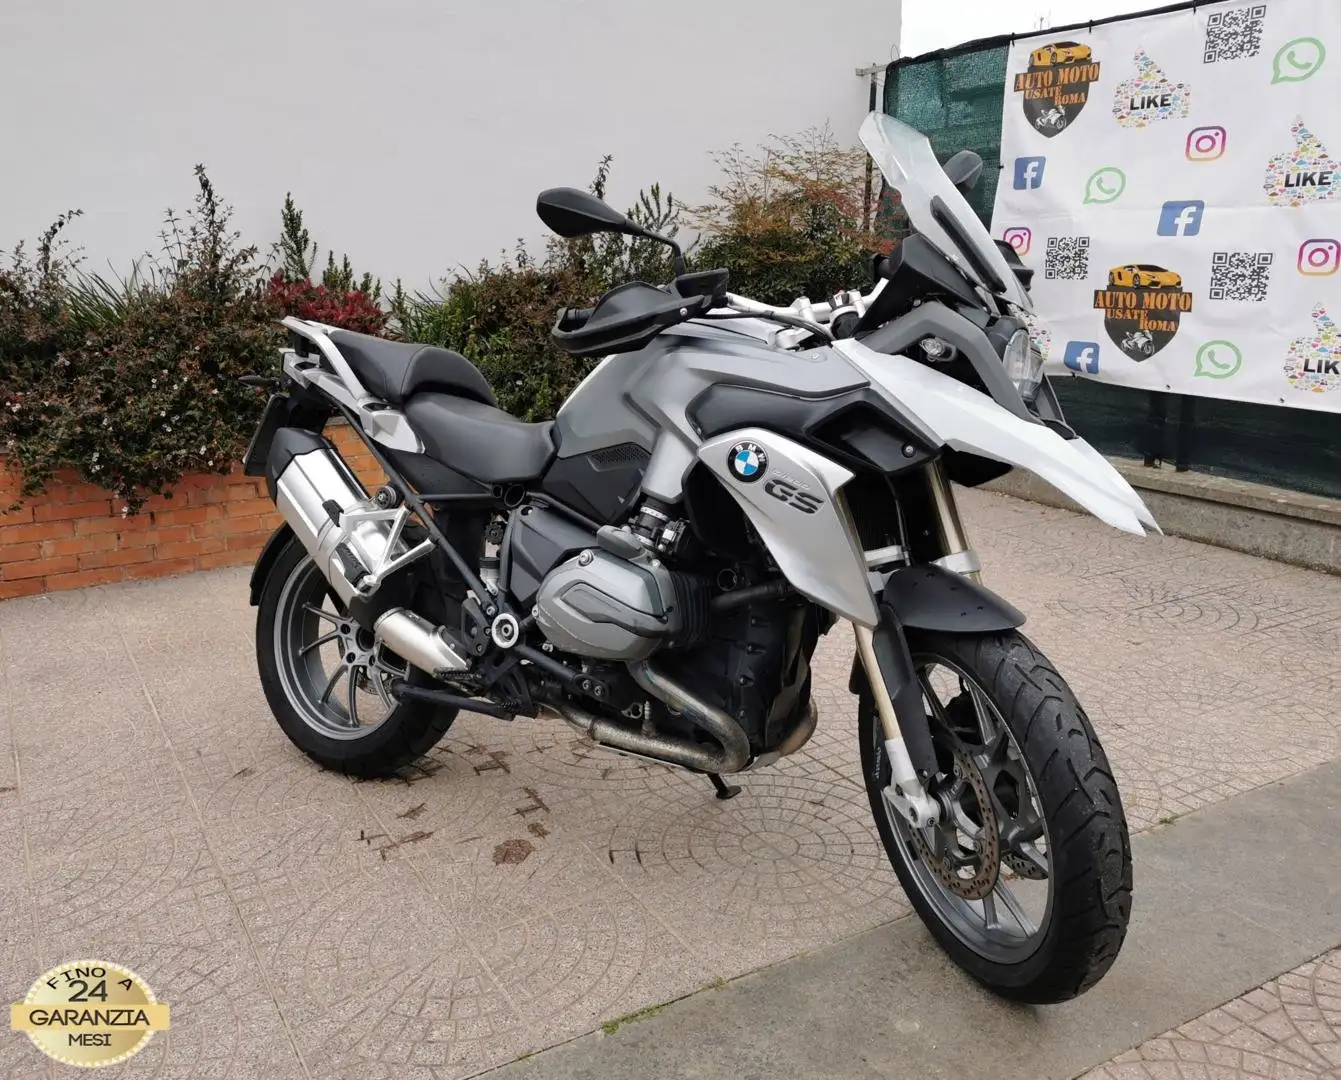 BMW R 1200 GS ABS ASC - 2016 - RATE AUTO MOTO SCOOTER Silver - 1